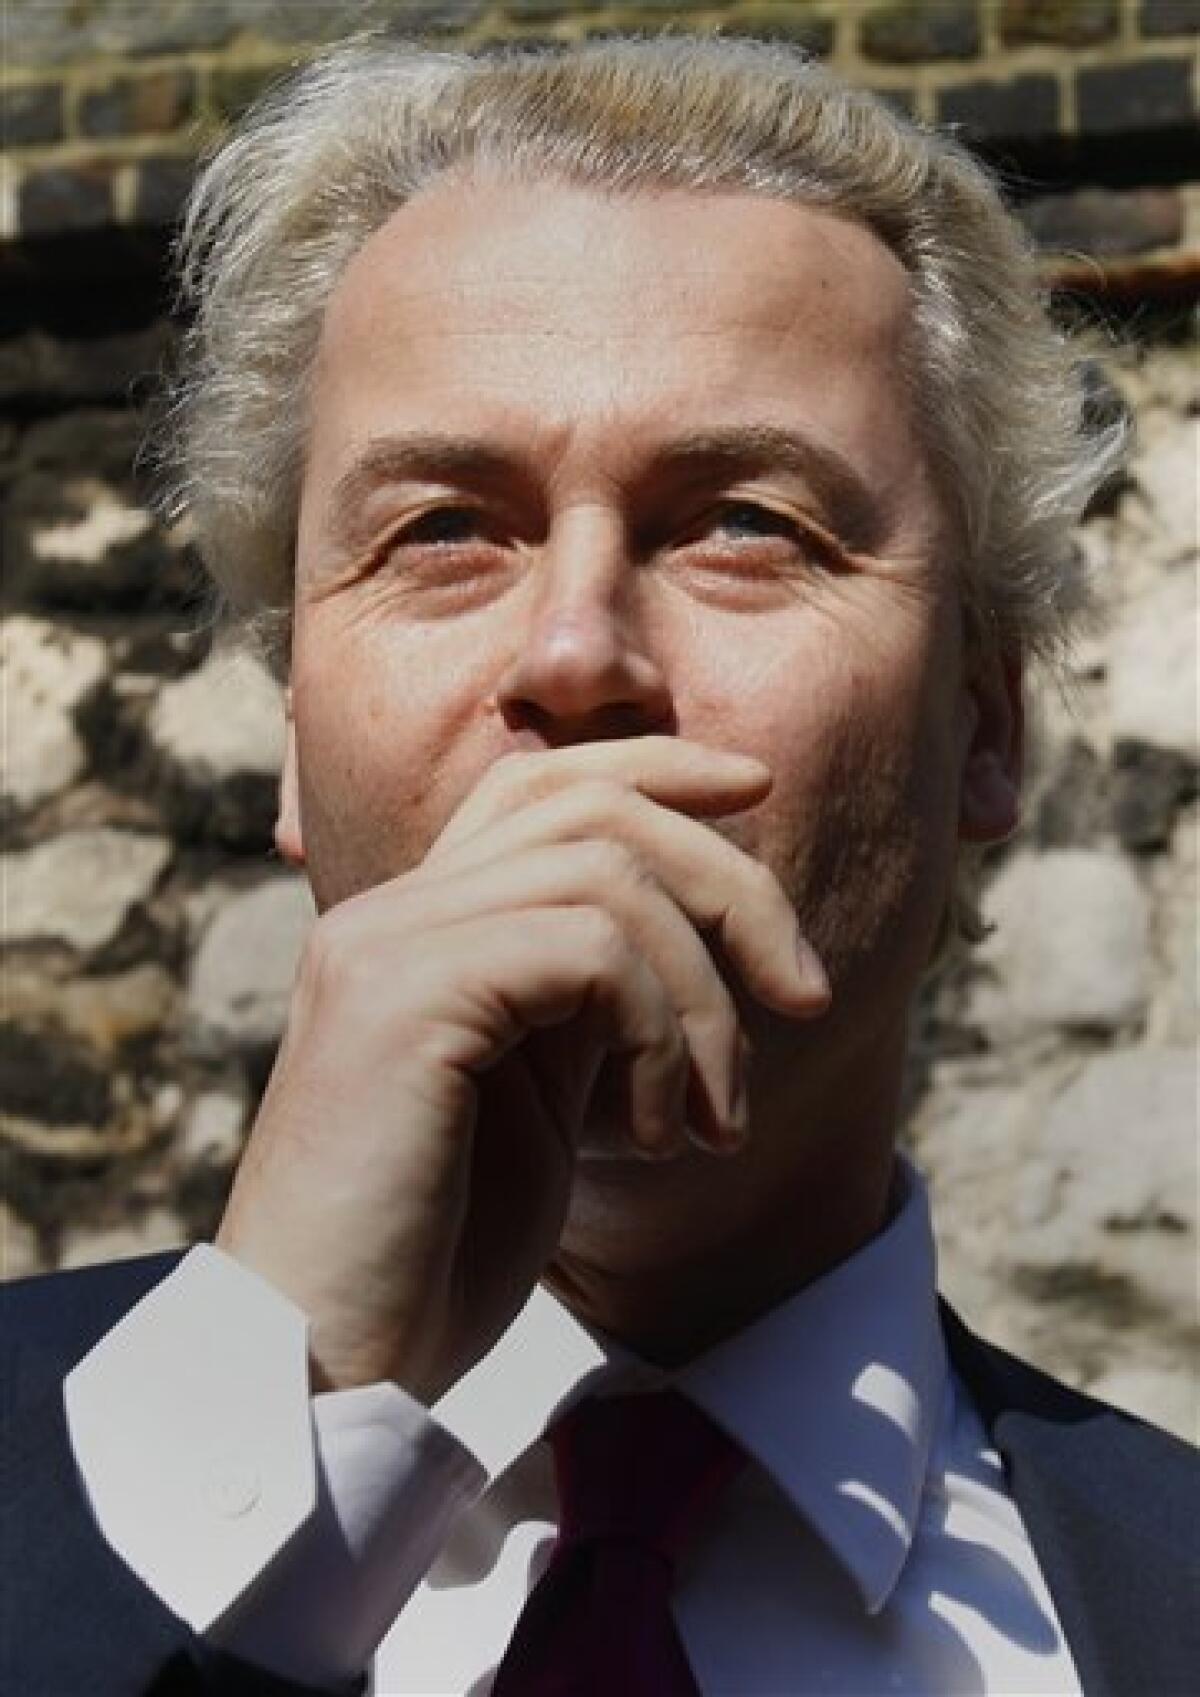 Controversial Dutch politician Geert Wilders arrives for a press conference in London, Friday, March 5, 2010. (AP Photo/Kirsty Wigglesworth)